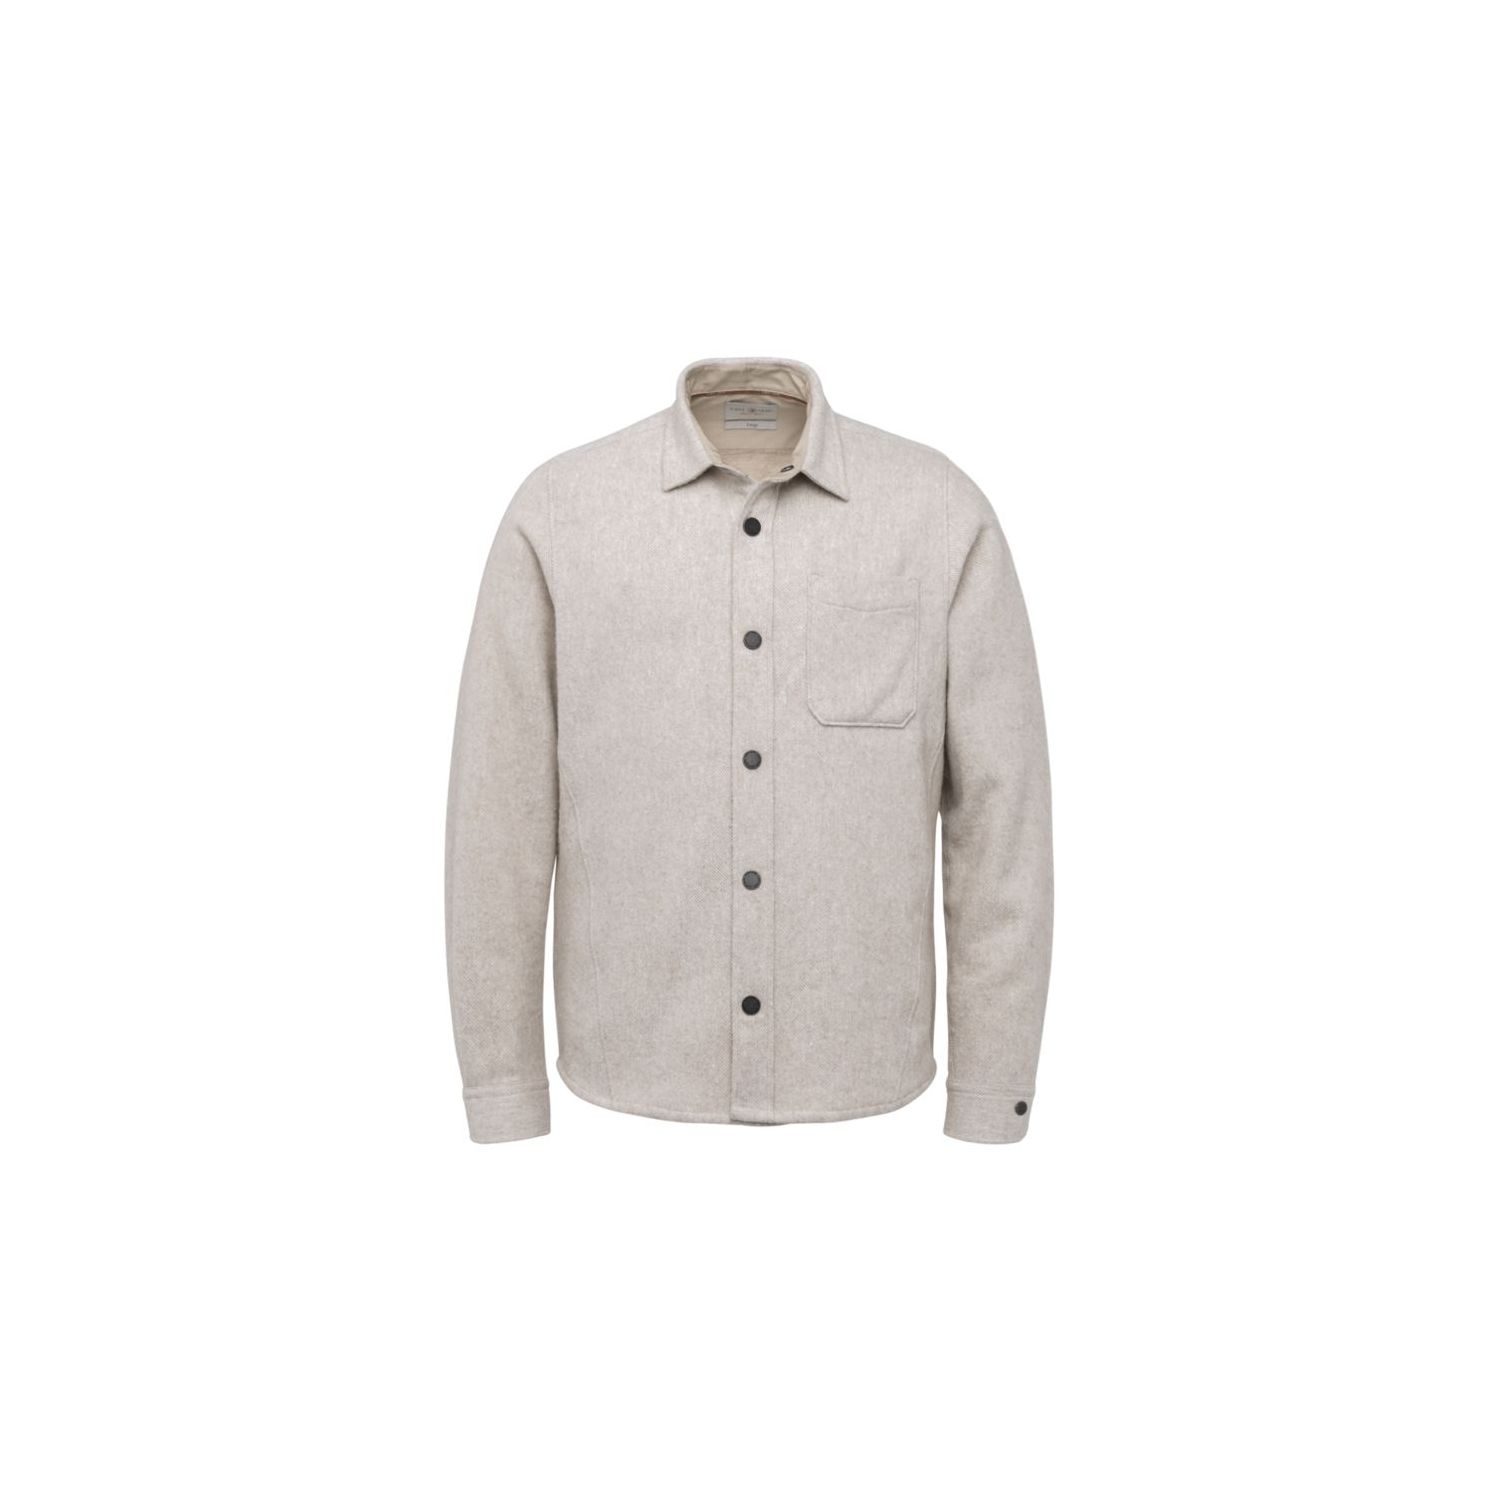 Cast Iron shirt wool blend relaxed fit silver lini